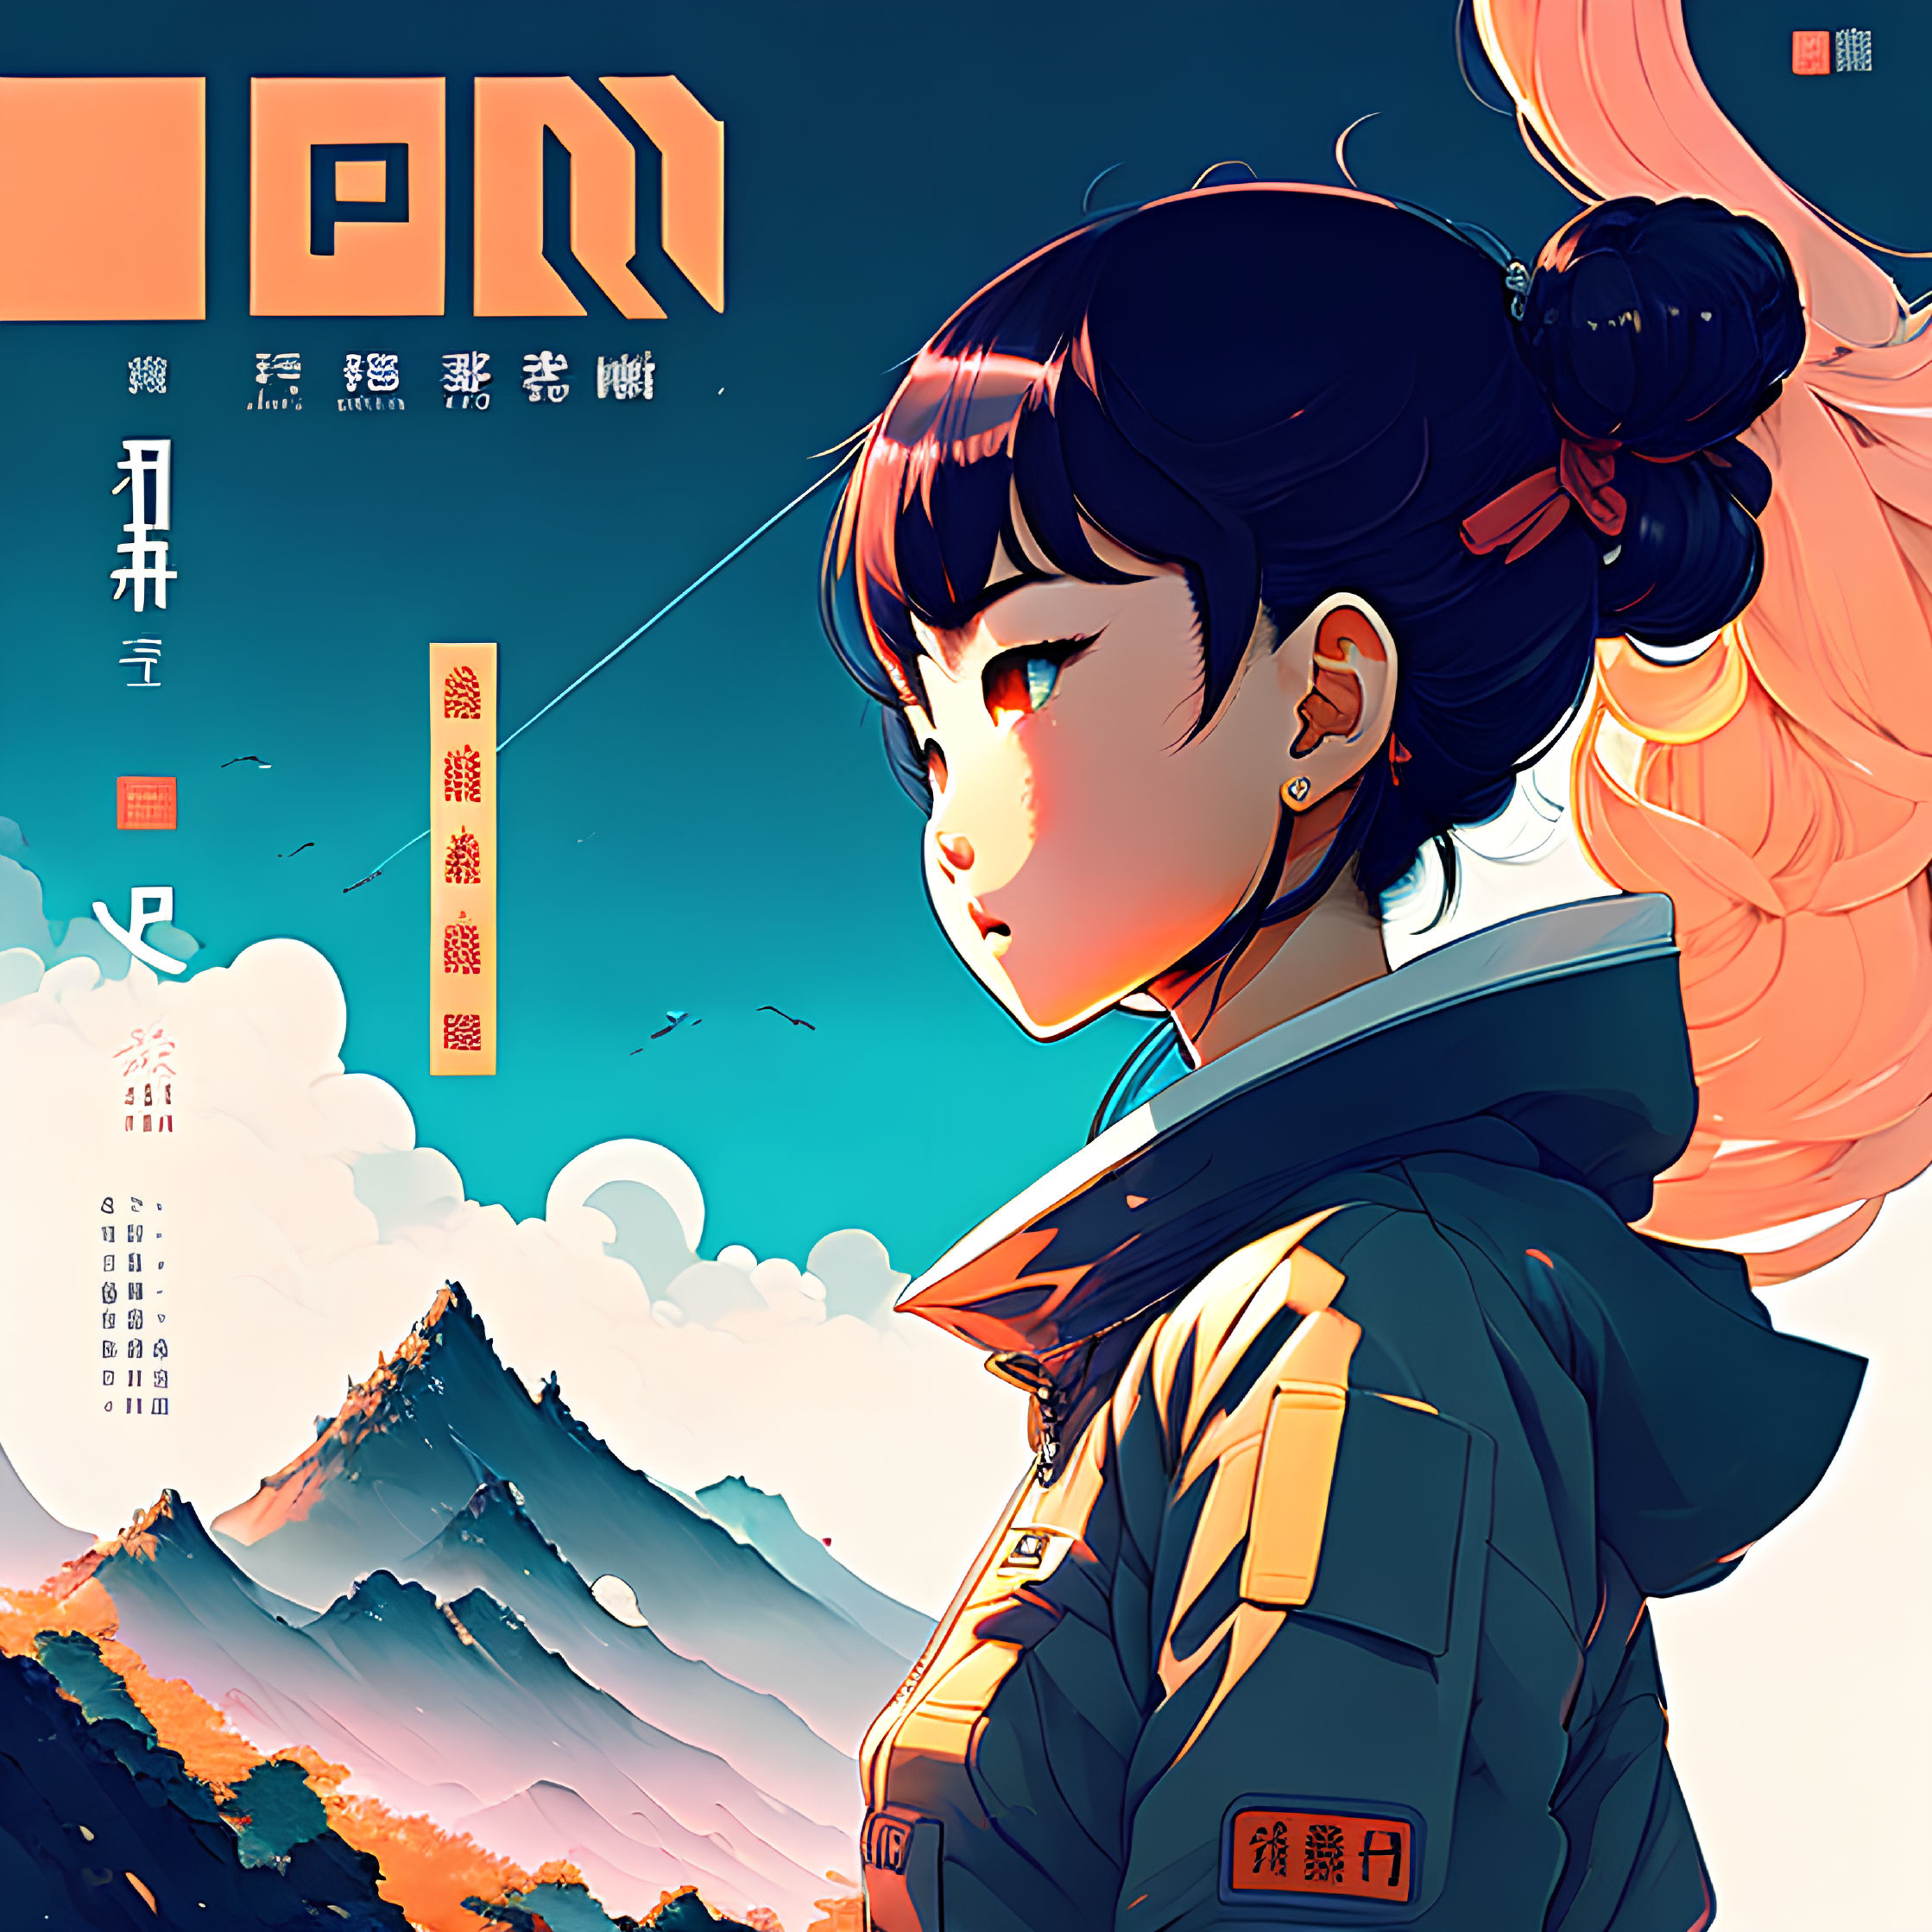 Illustration of girl in yellow and blue outfit with ponytail, mountain landscape & stylized clouds